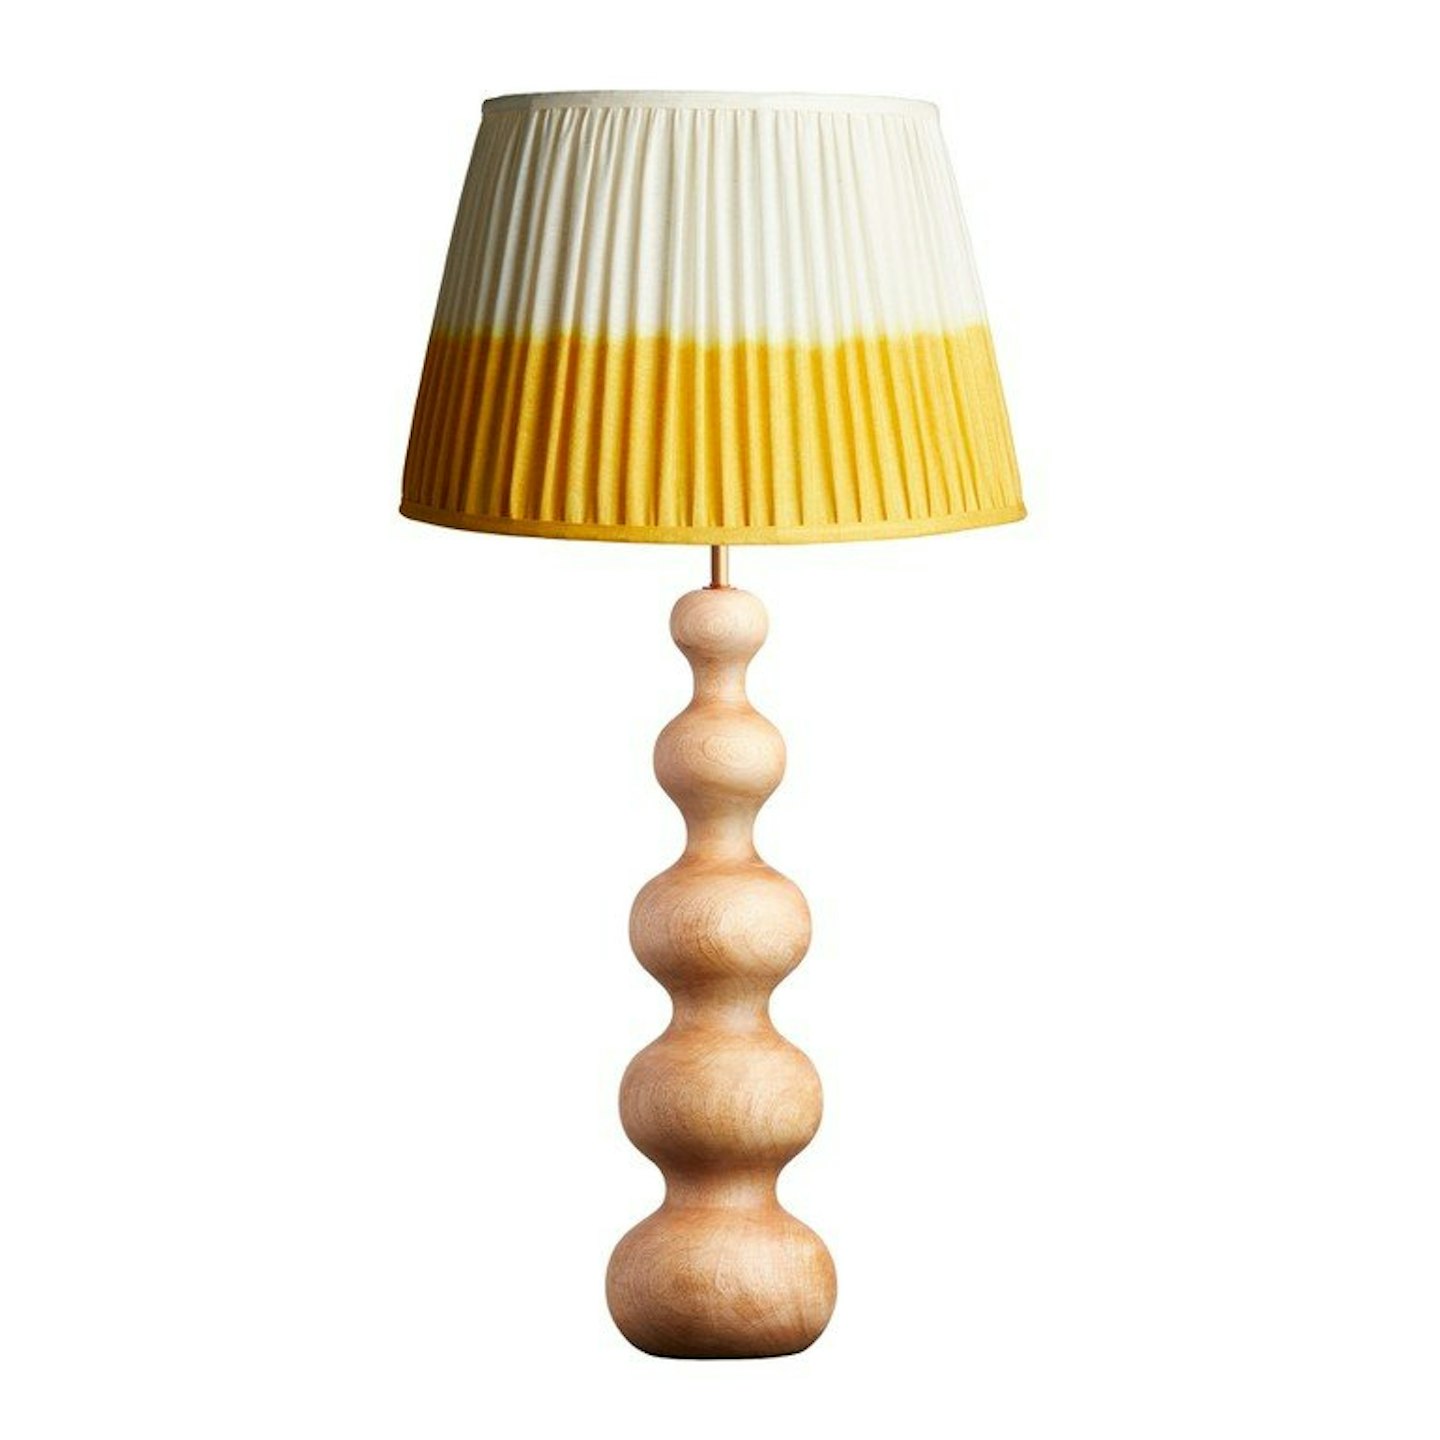 Pooky, larger wobster table lamp, £254